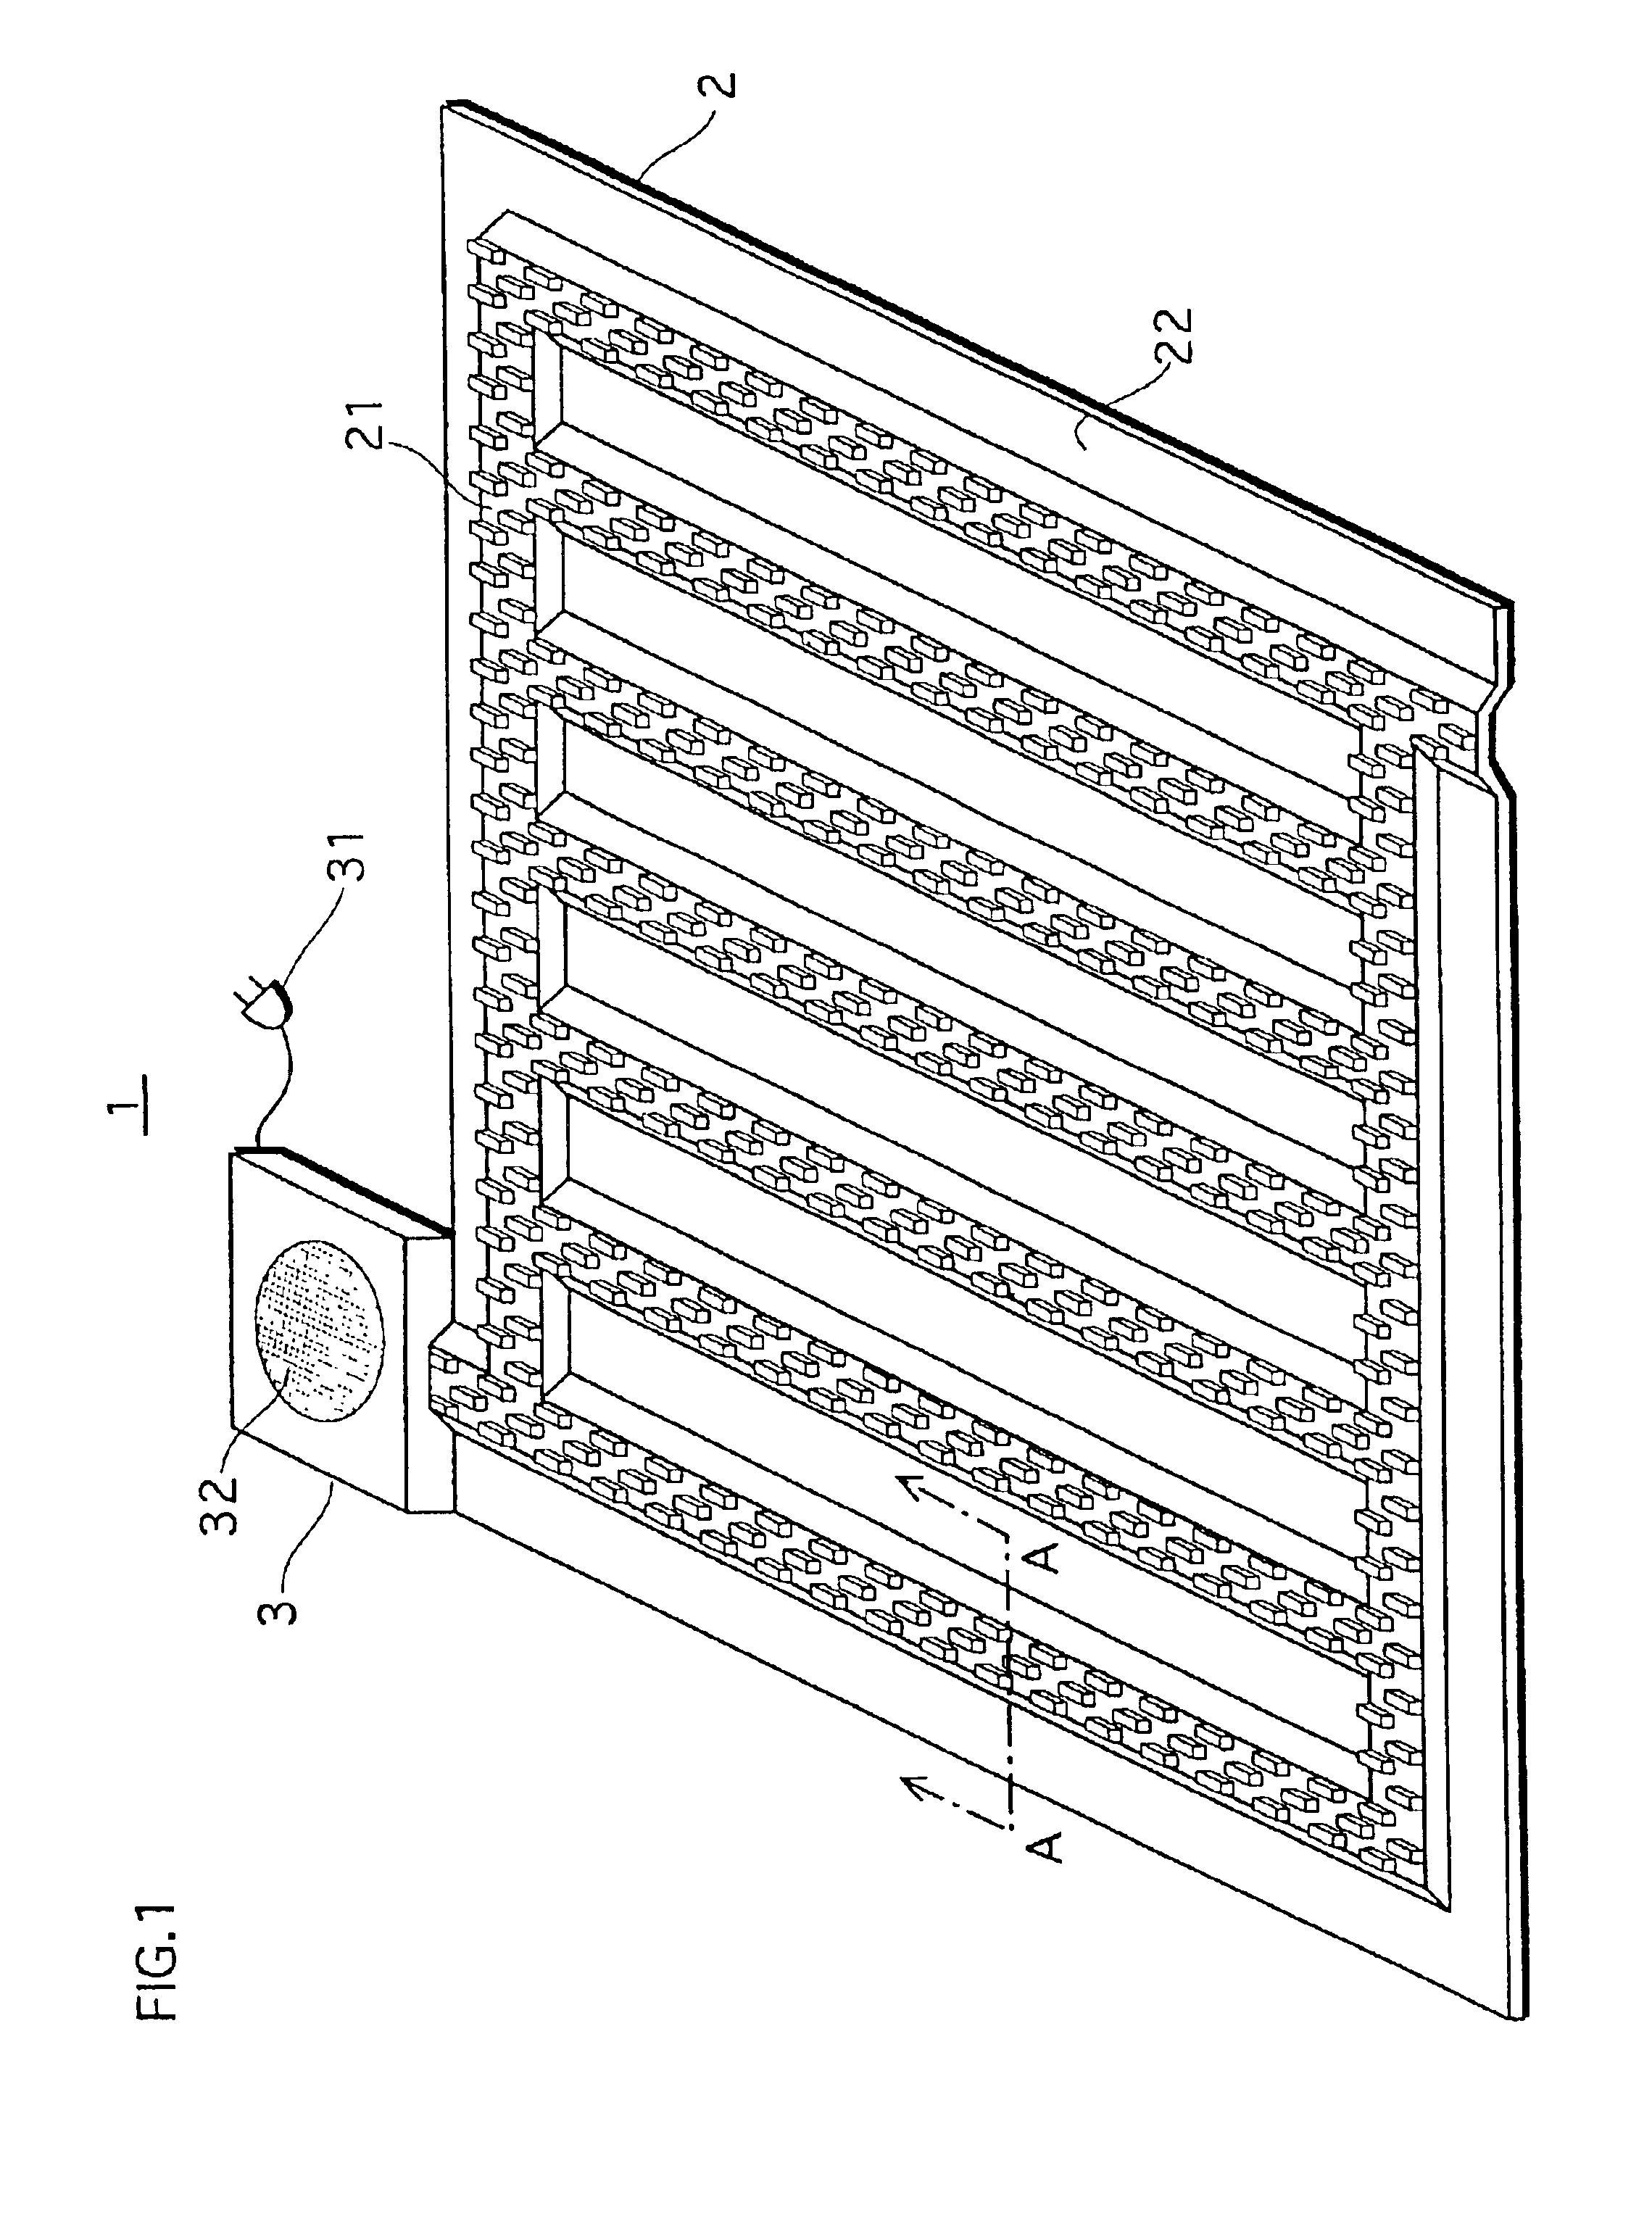 Lighting apparatus with enhanced capability of removing heat